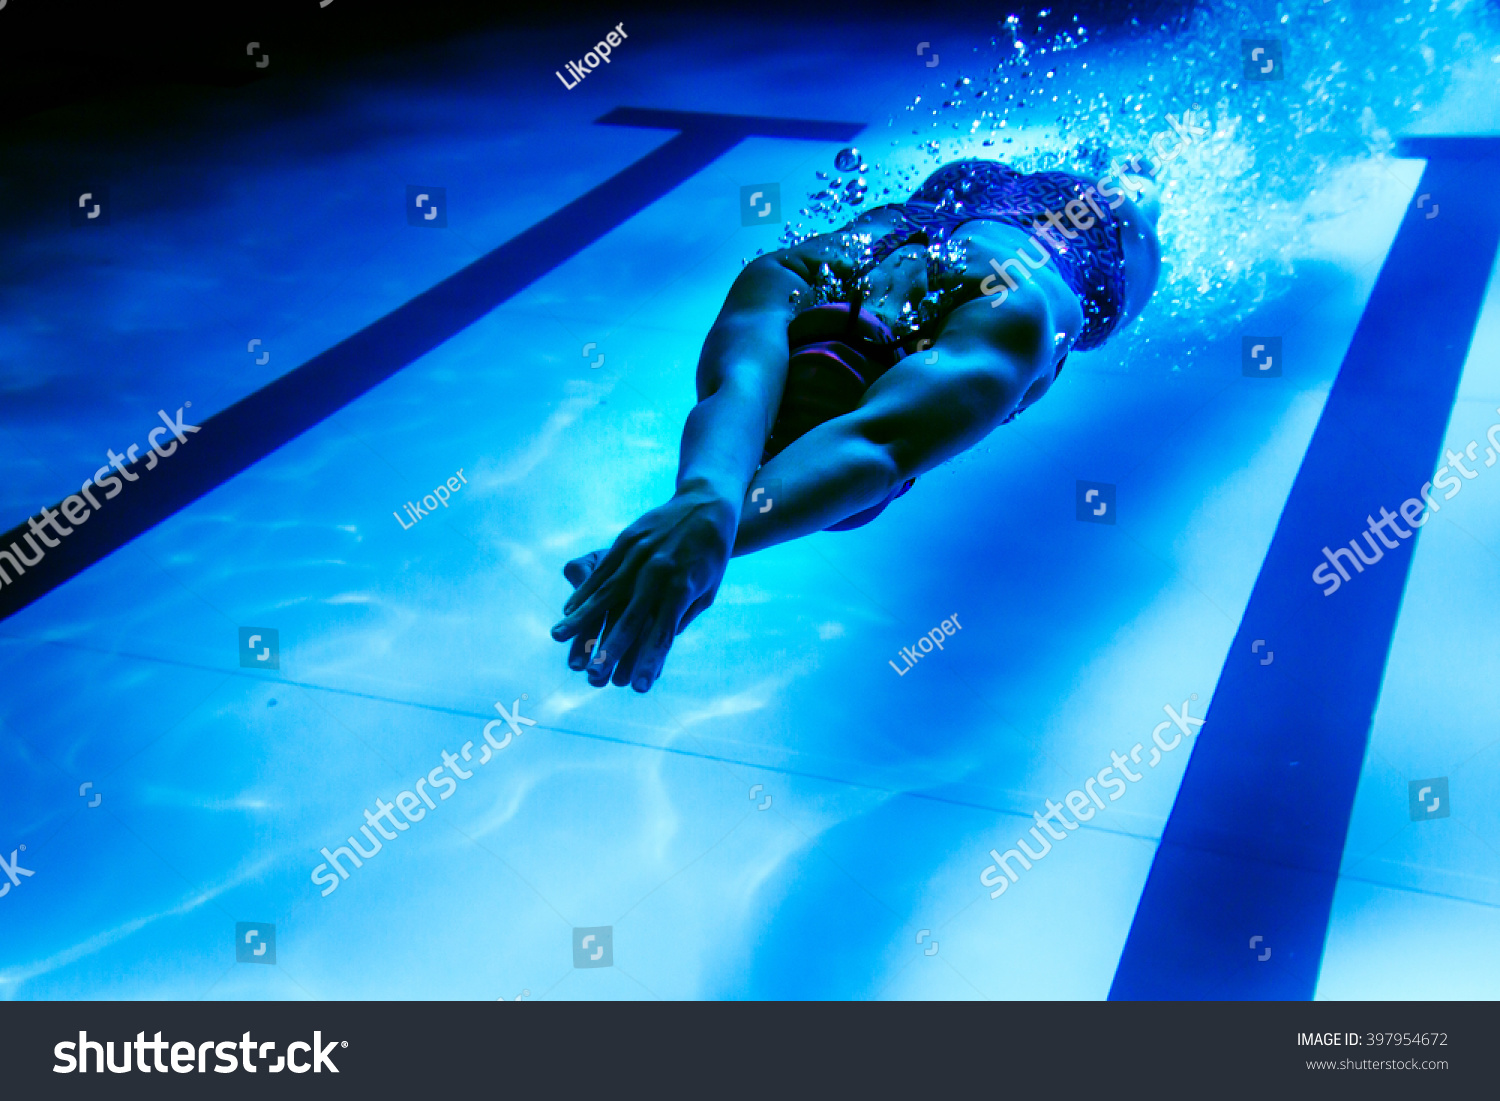 Female swimmer underwater/ Underwater shot of a swimmer diving after the jump in the swimming pool.  #397954672